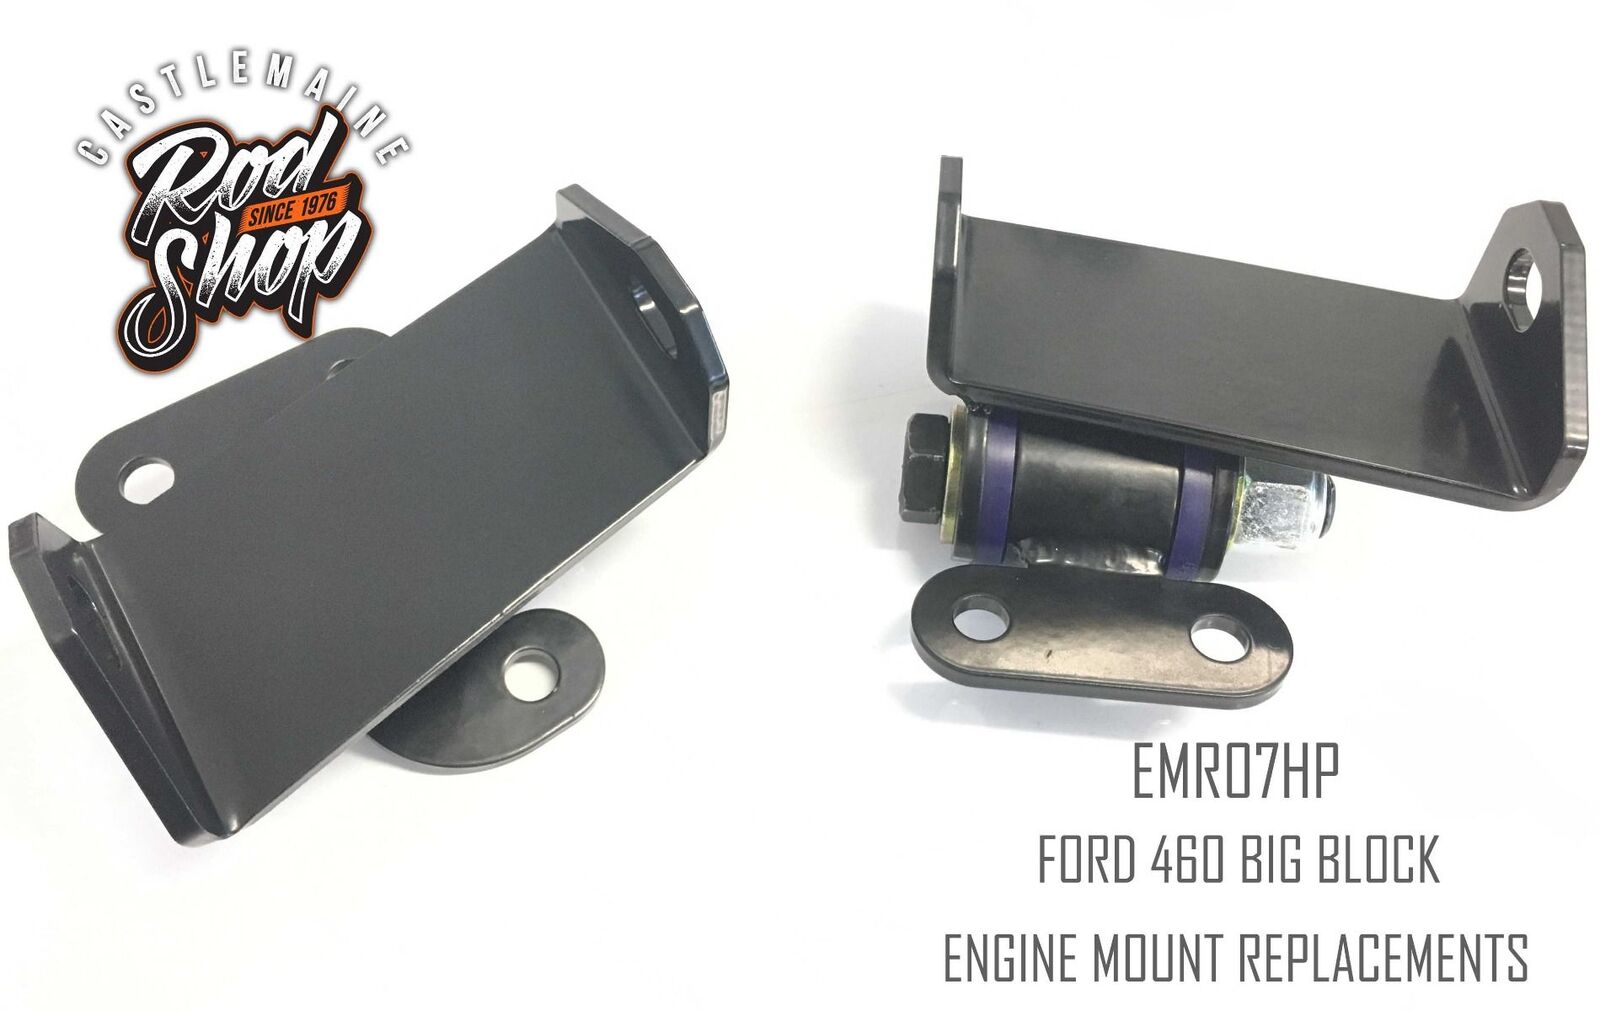 Rubber Engine Mount Replacemants for Big Block Ford (429 -460)